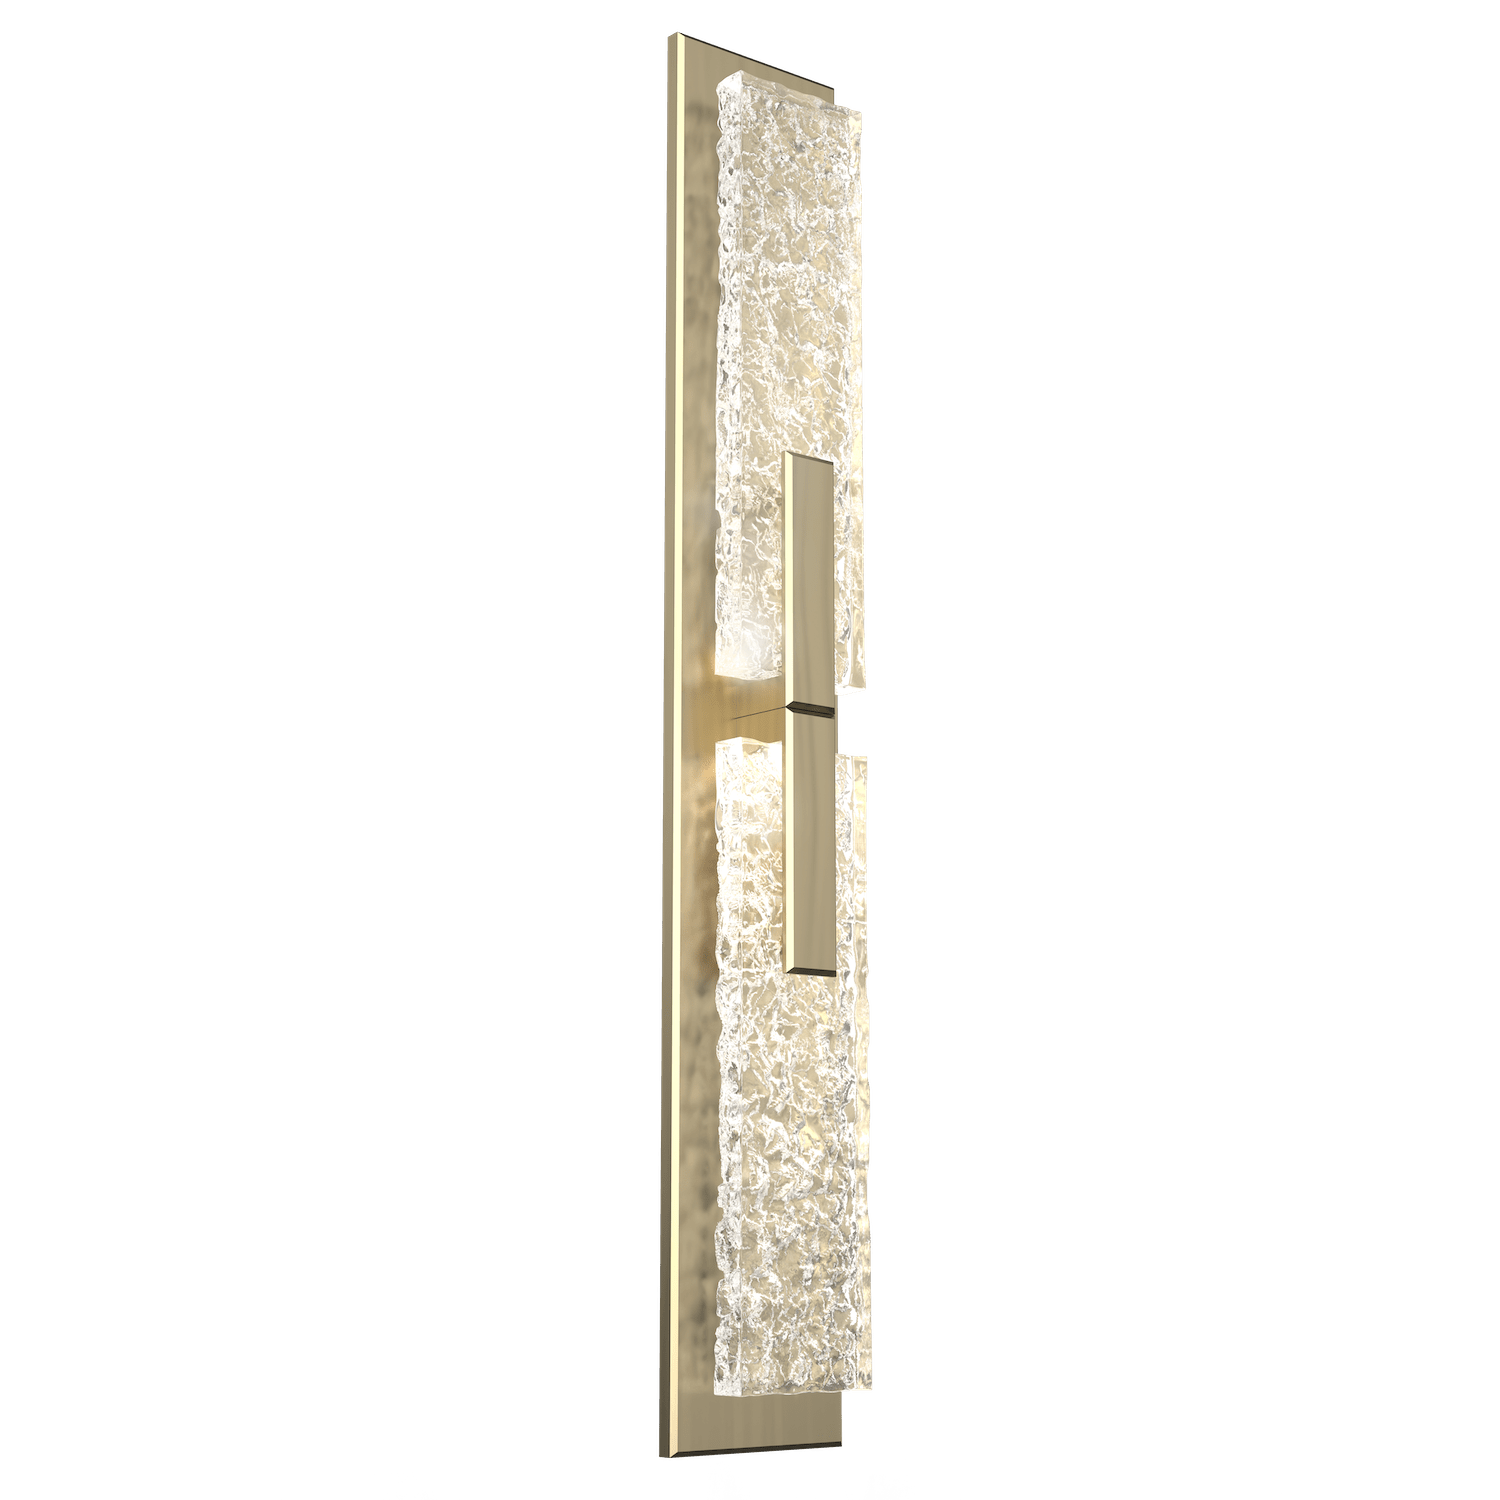 IDB0061-02-HB-GC-Hammerton-Studio-Glacier-double-wall-sconce-with-heritage-brass-finish-and-clear-blown-glass-with-geo-clear-cast-glass-diffusers-and-LED-lamping